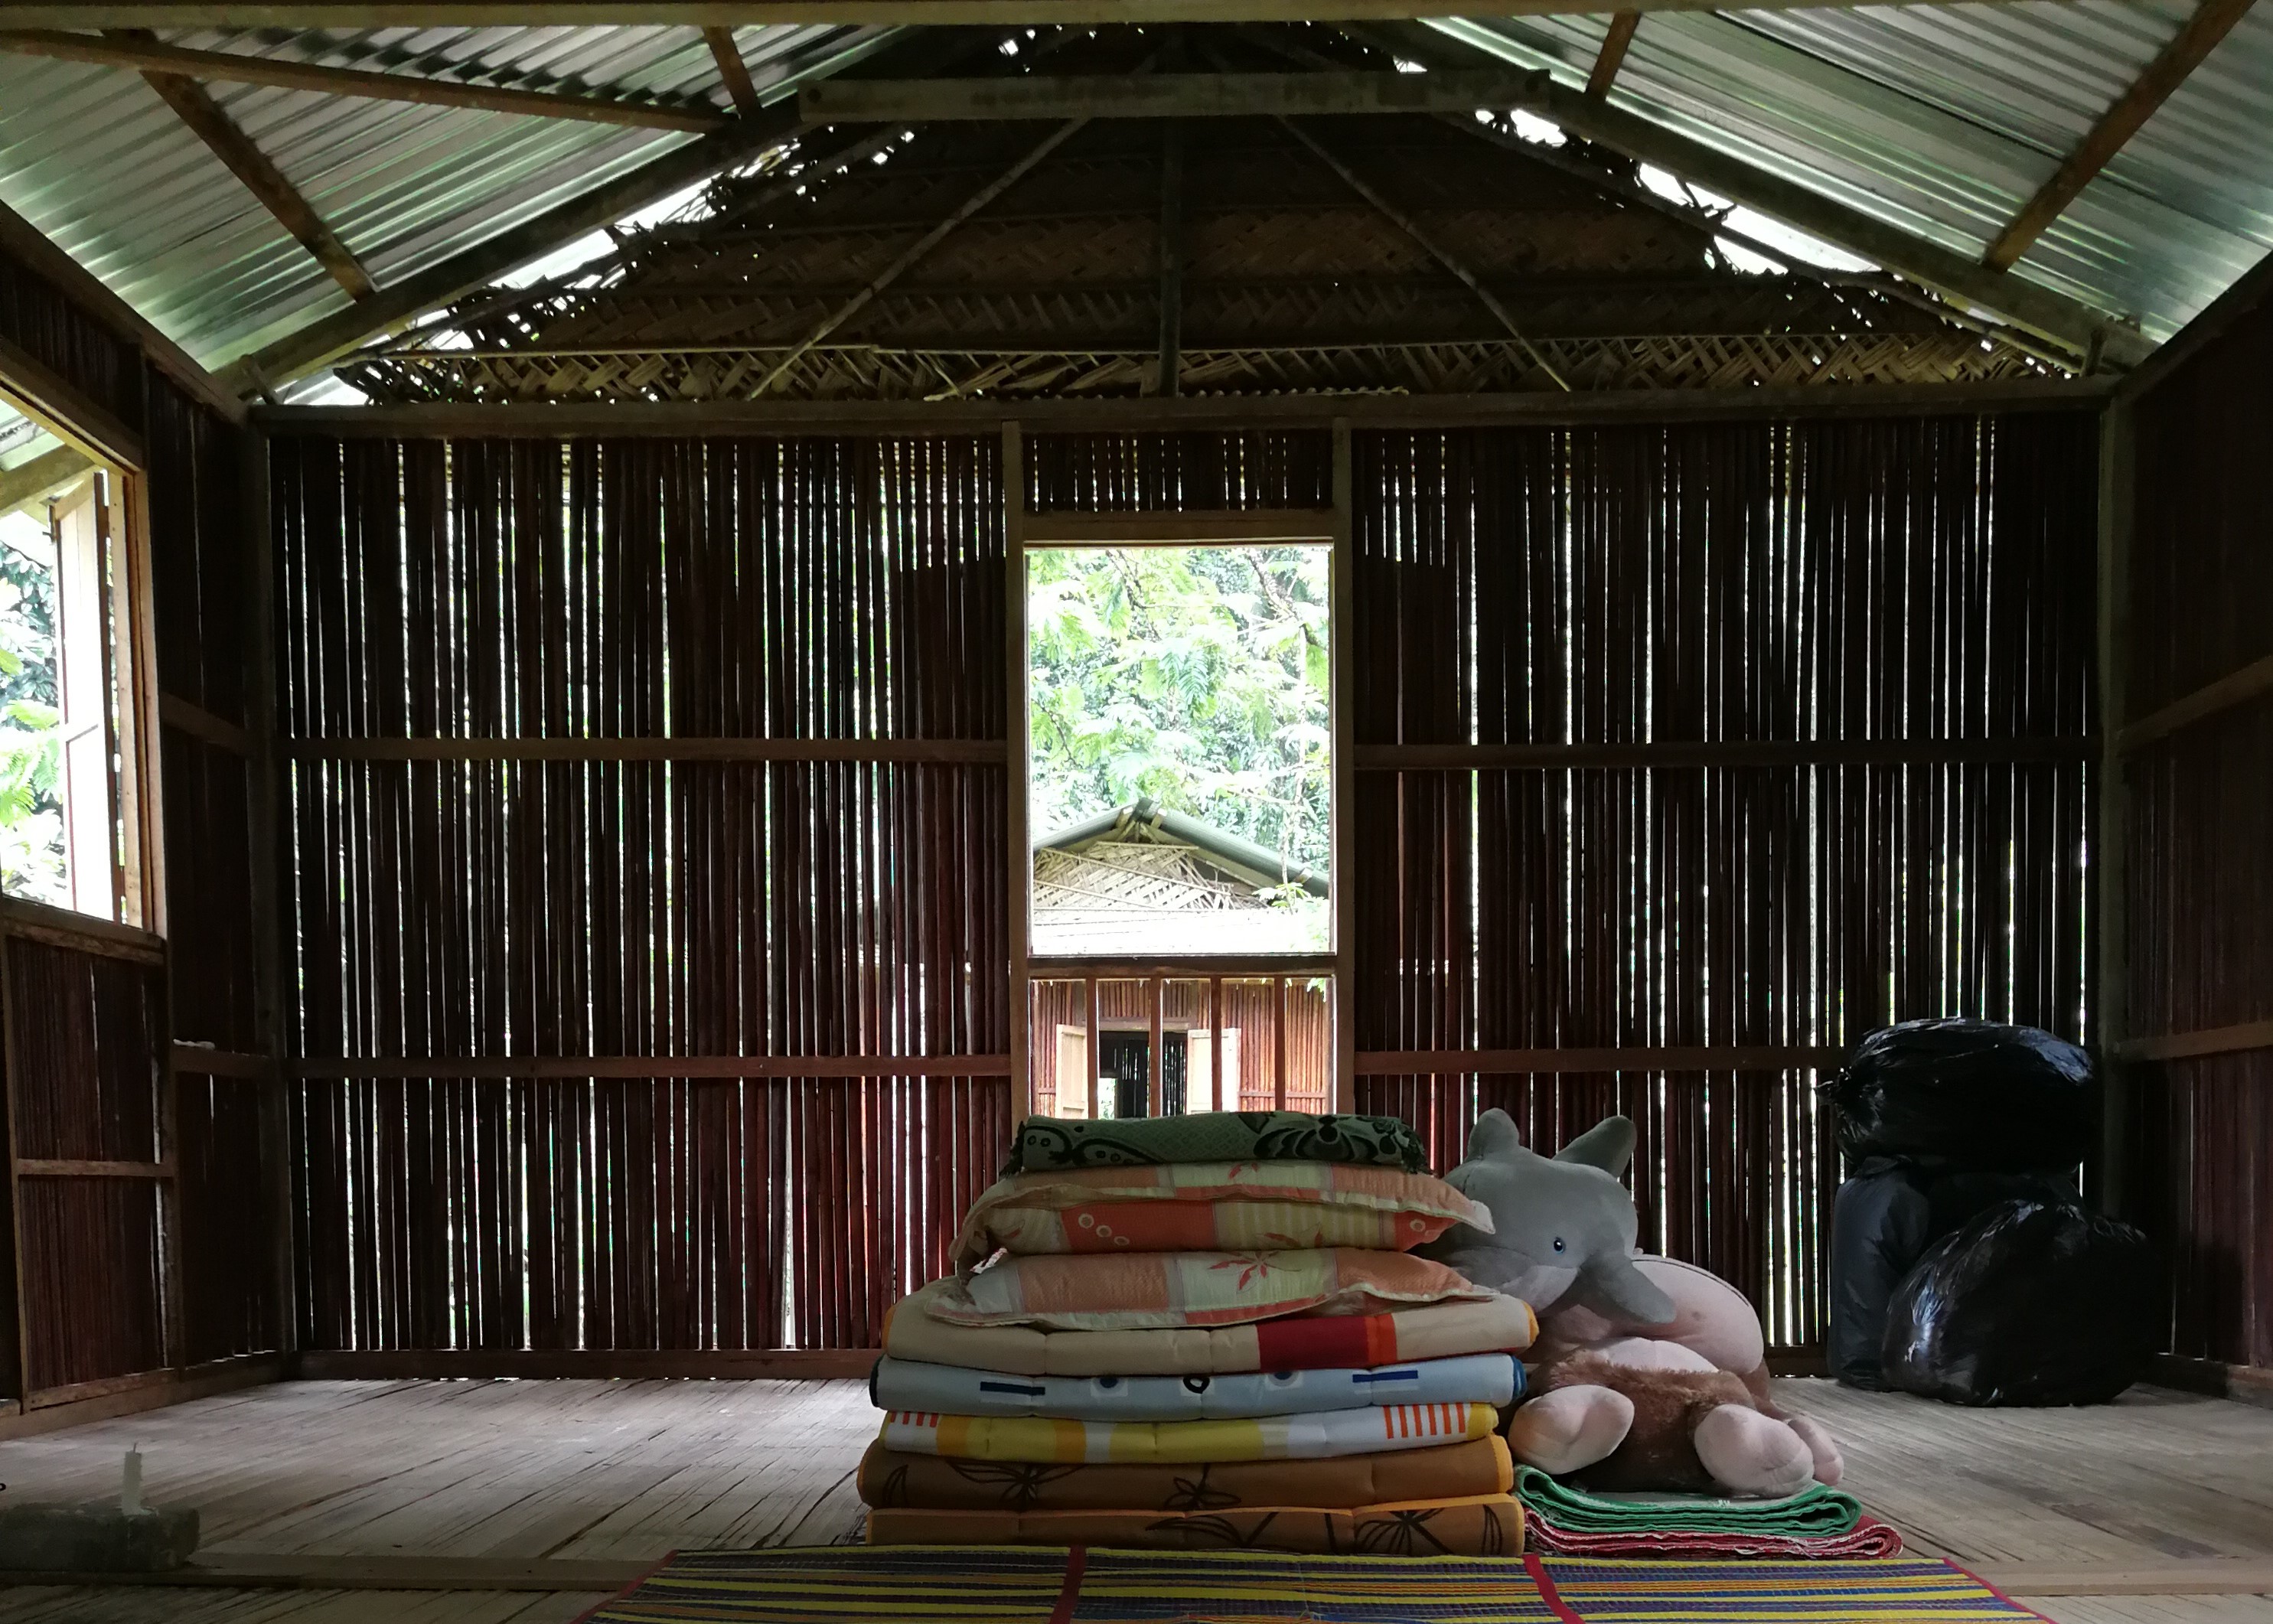 Guests stay in simple but comfortable bamboo chalets built for travellers; those thick blankets come in useful at night when the air turns pleasantly cool.